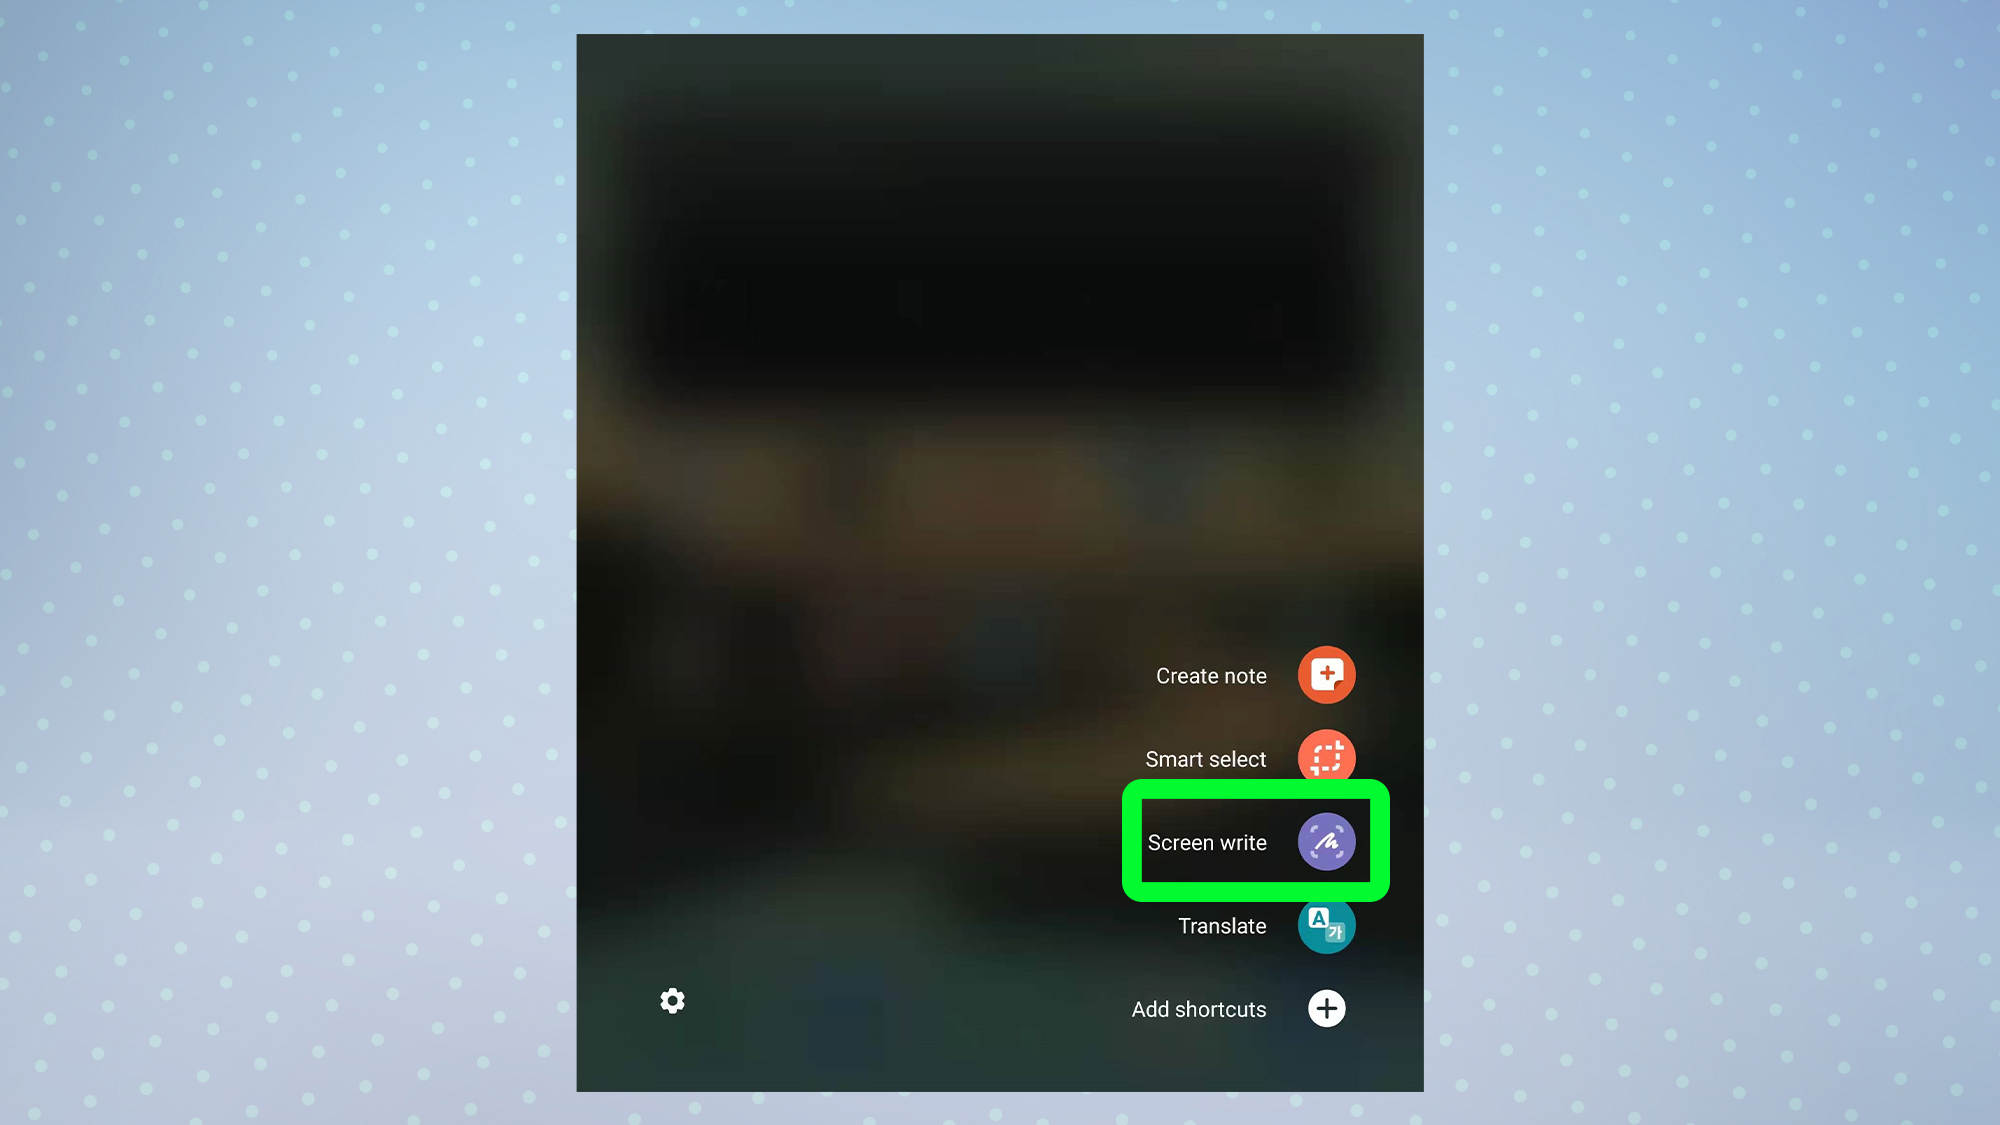 A screenshot from the Samsung Galaxy Z Fold 3 showing the screen write button highlighted